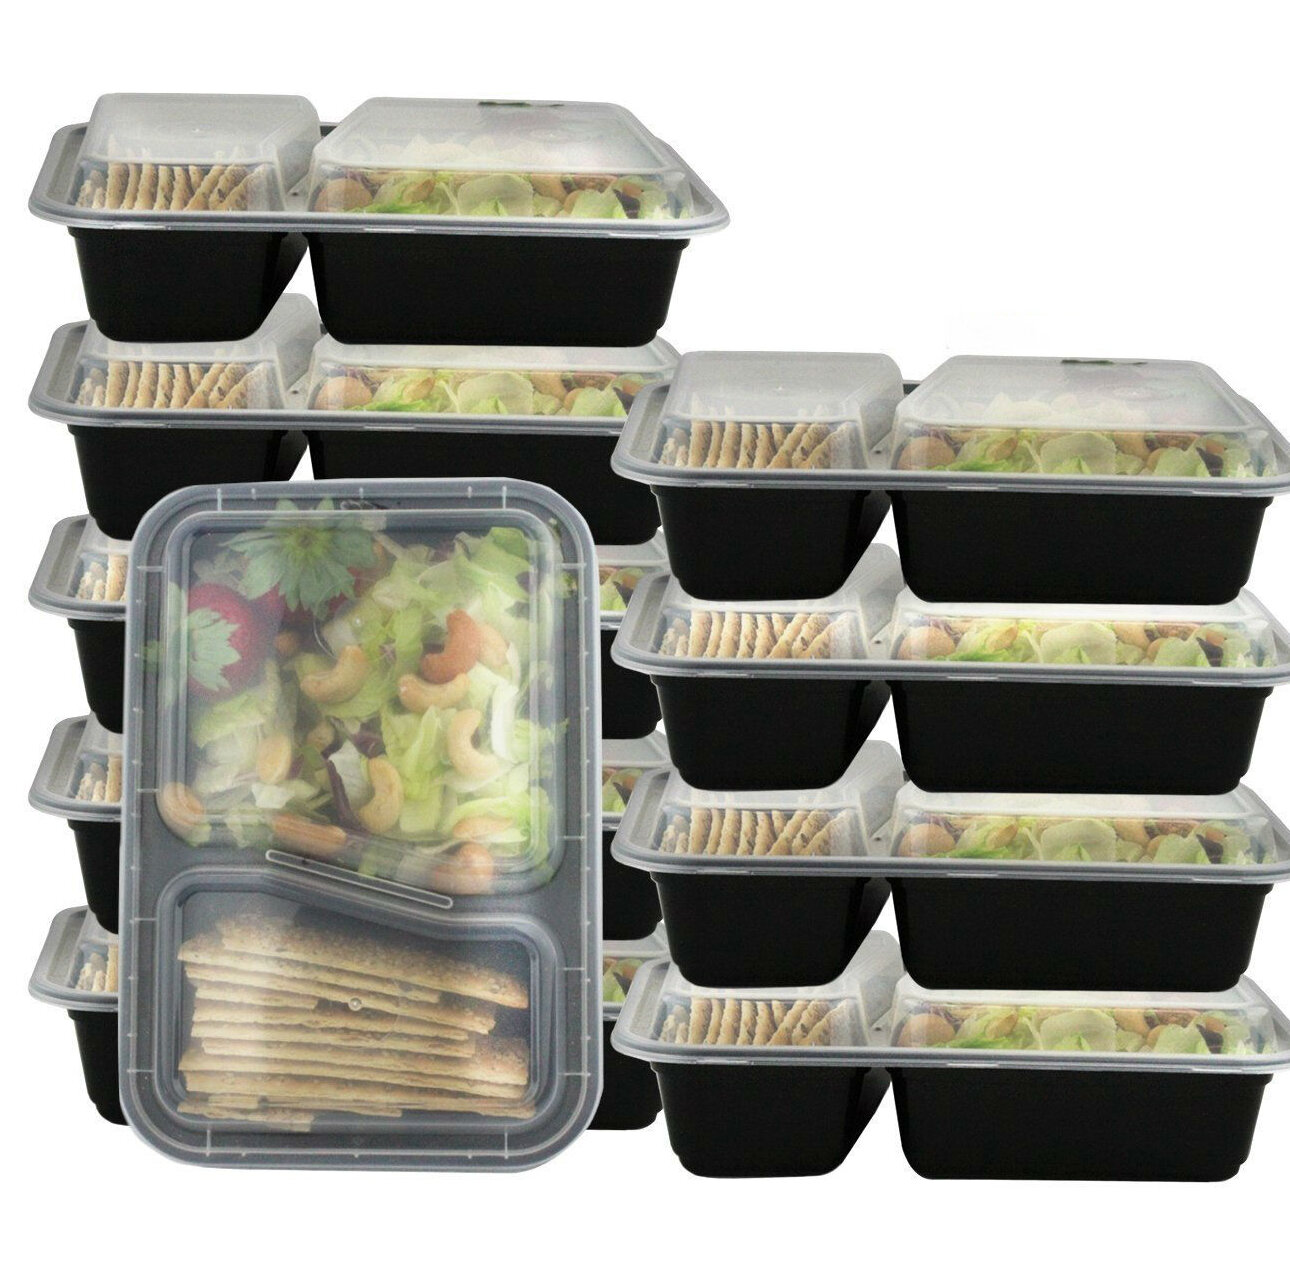 Genicook Oven-Safe Glass Meal-Prep Divided Food Storage Container Sets